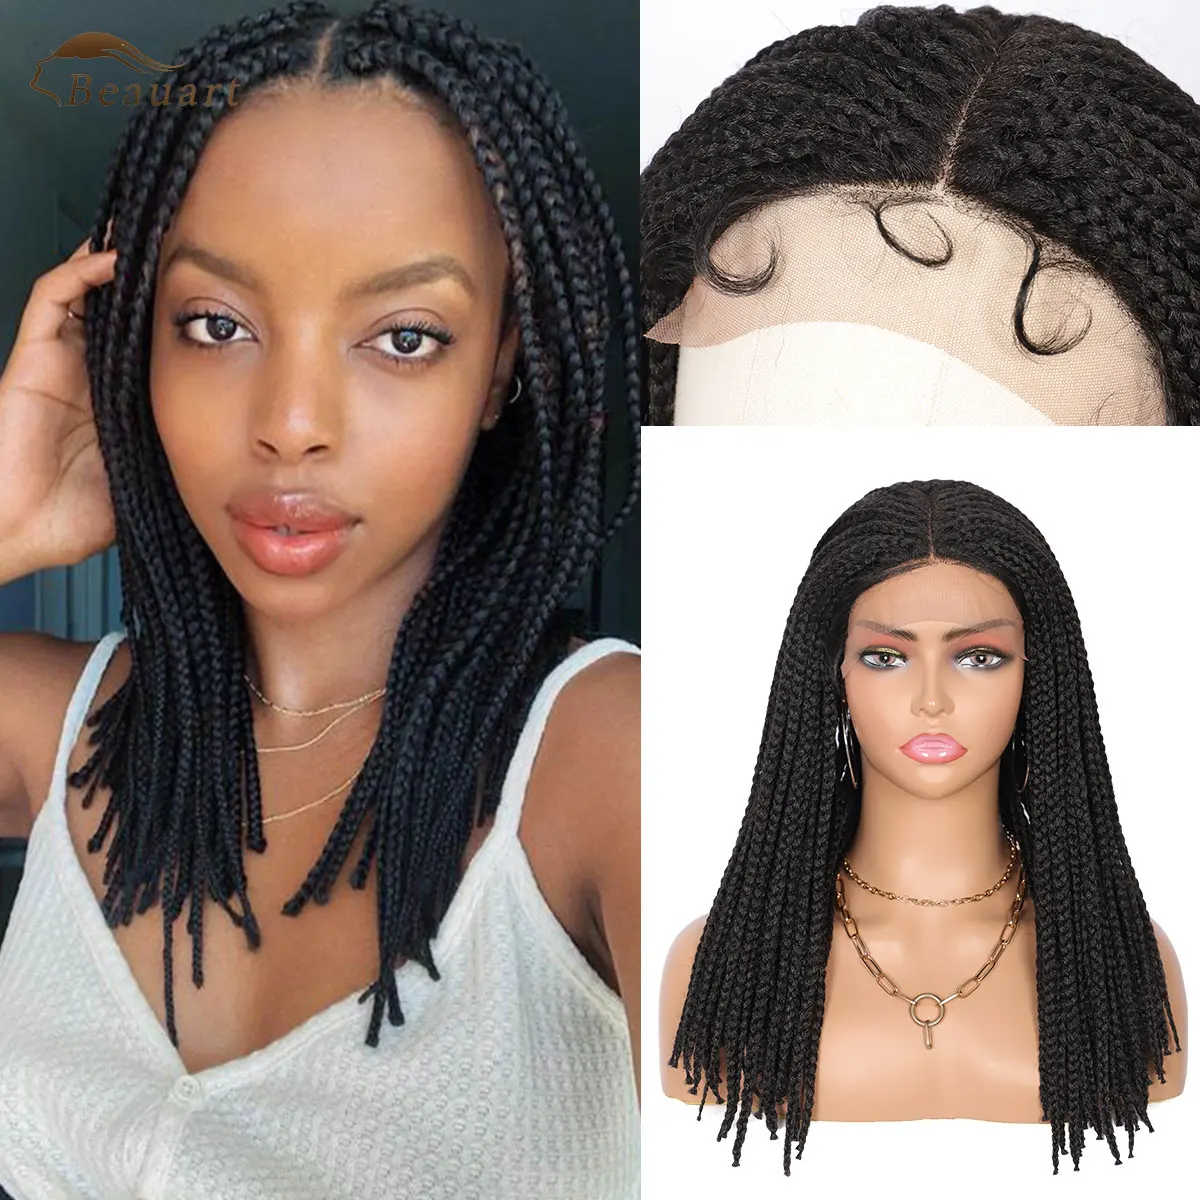 

Beauart Synthetic Lace Front Box Braided Wigs with Baby Hair for Black Women Twisted Braids Bunt Bob Mid Parted Frontal Lace Wig